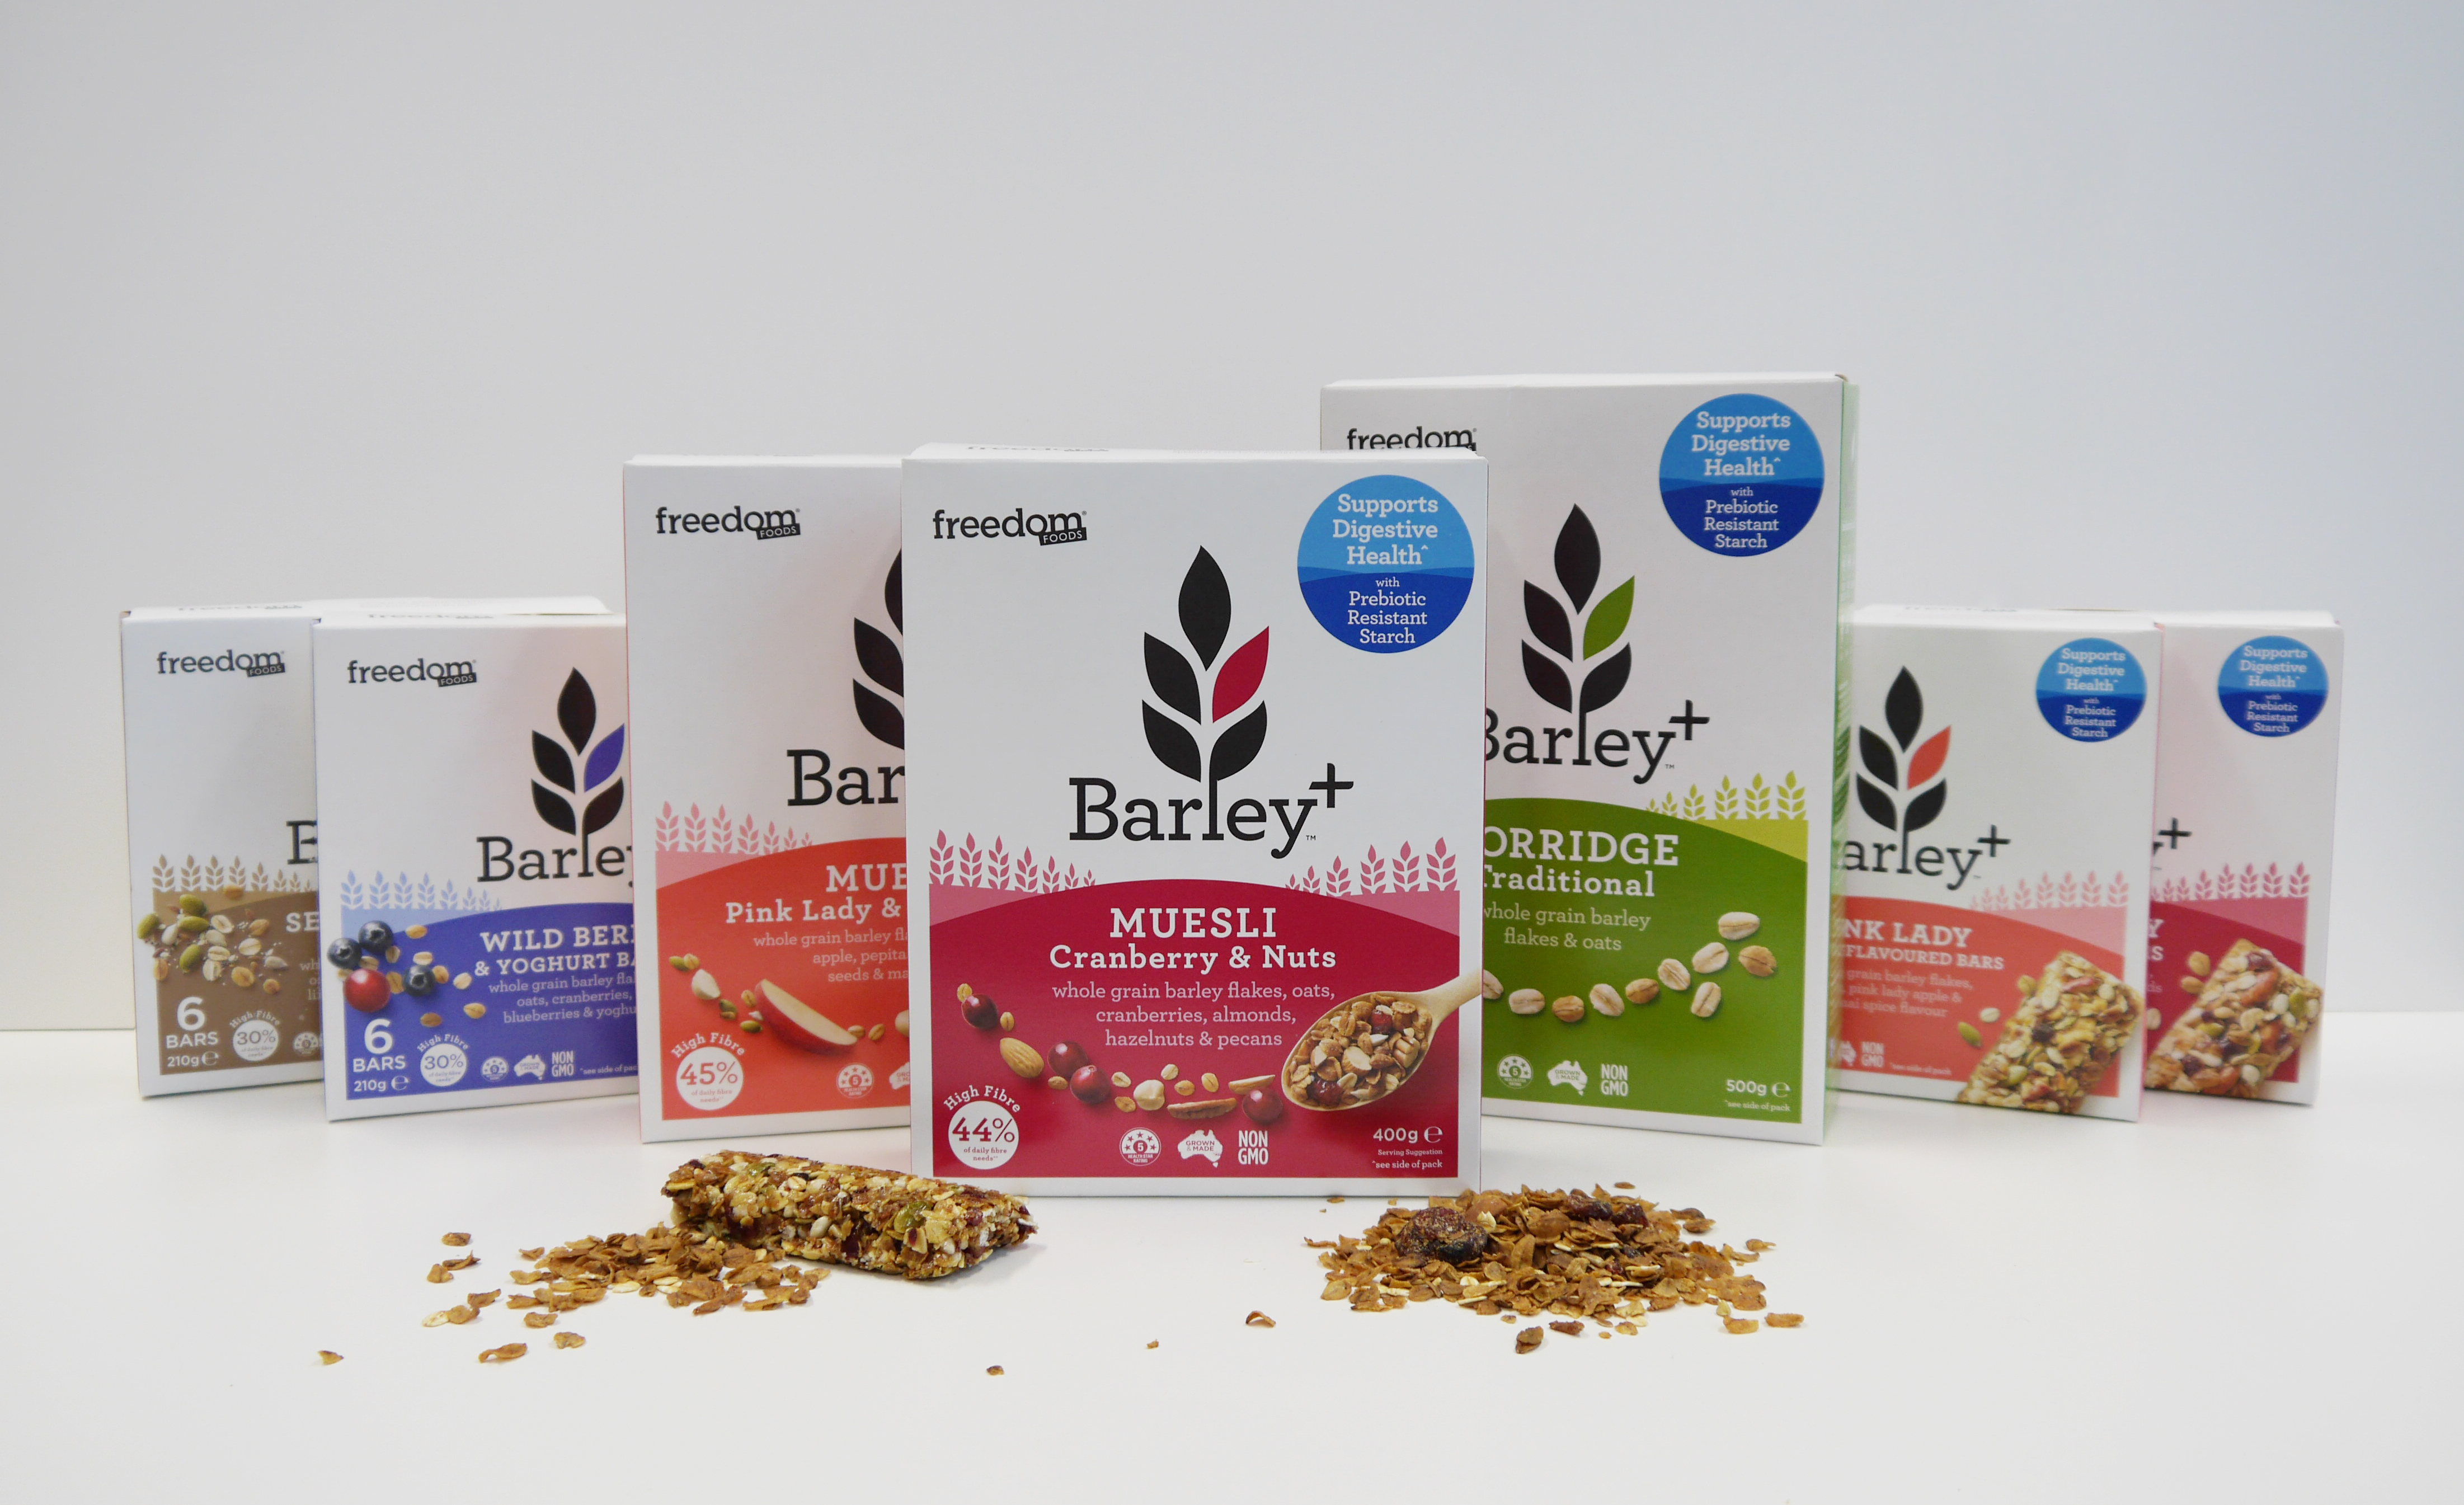 Freedom Foods has just launched their new Barley+ range of cereals and muesli bars, with our BARLEYmaxTM as the key ingredient.